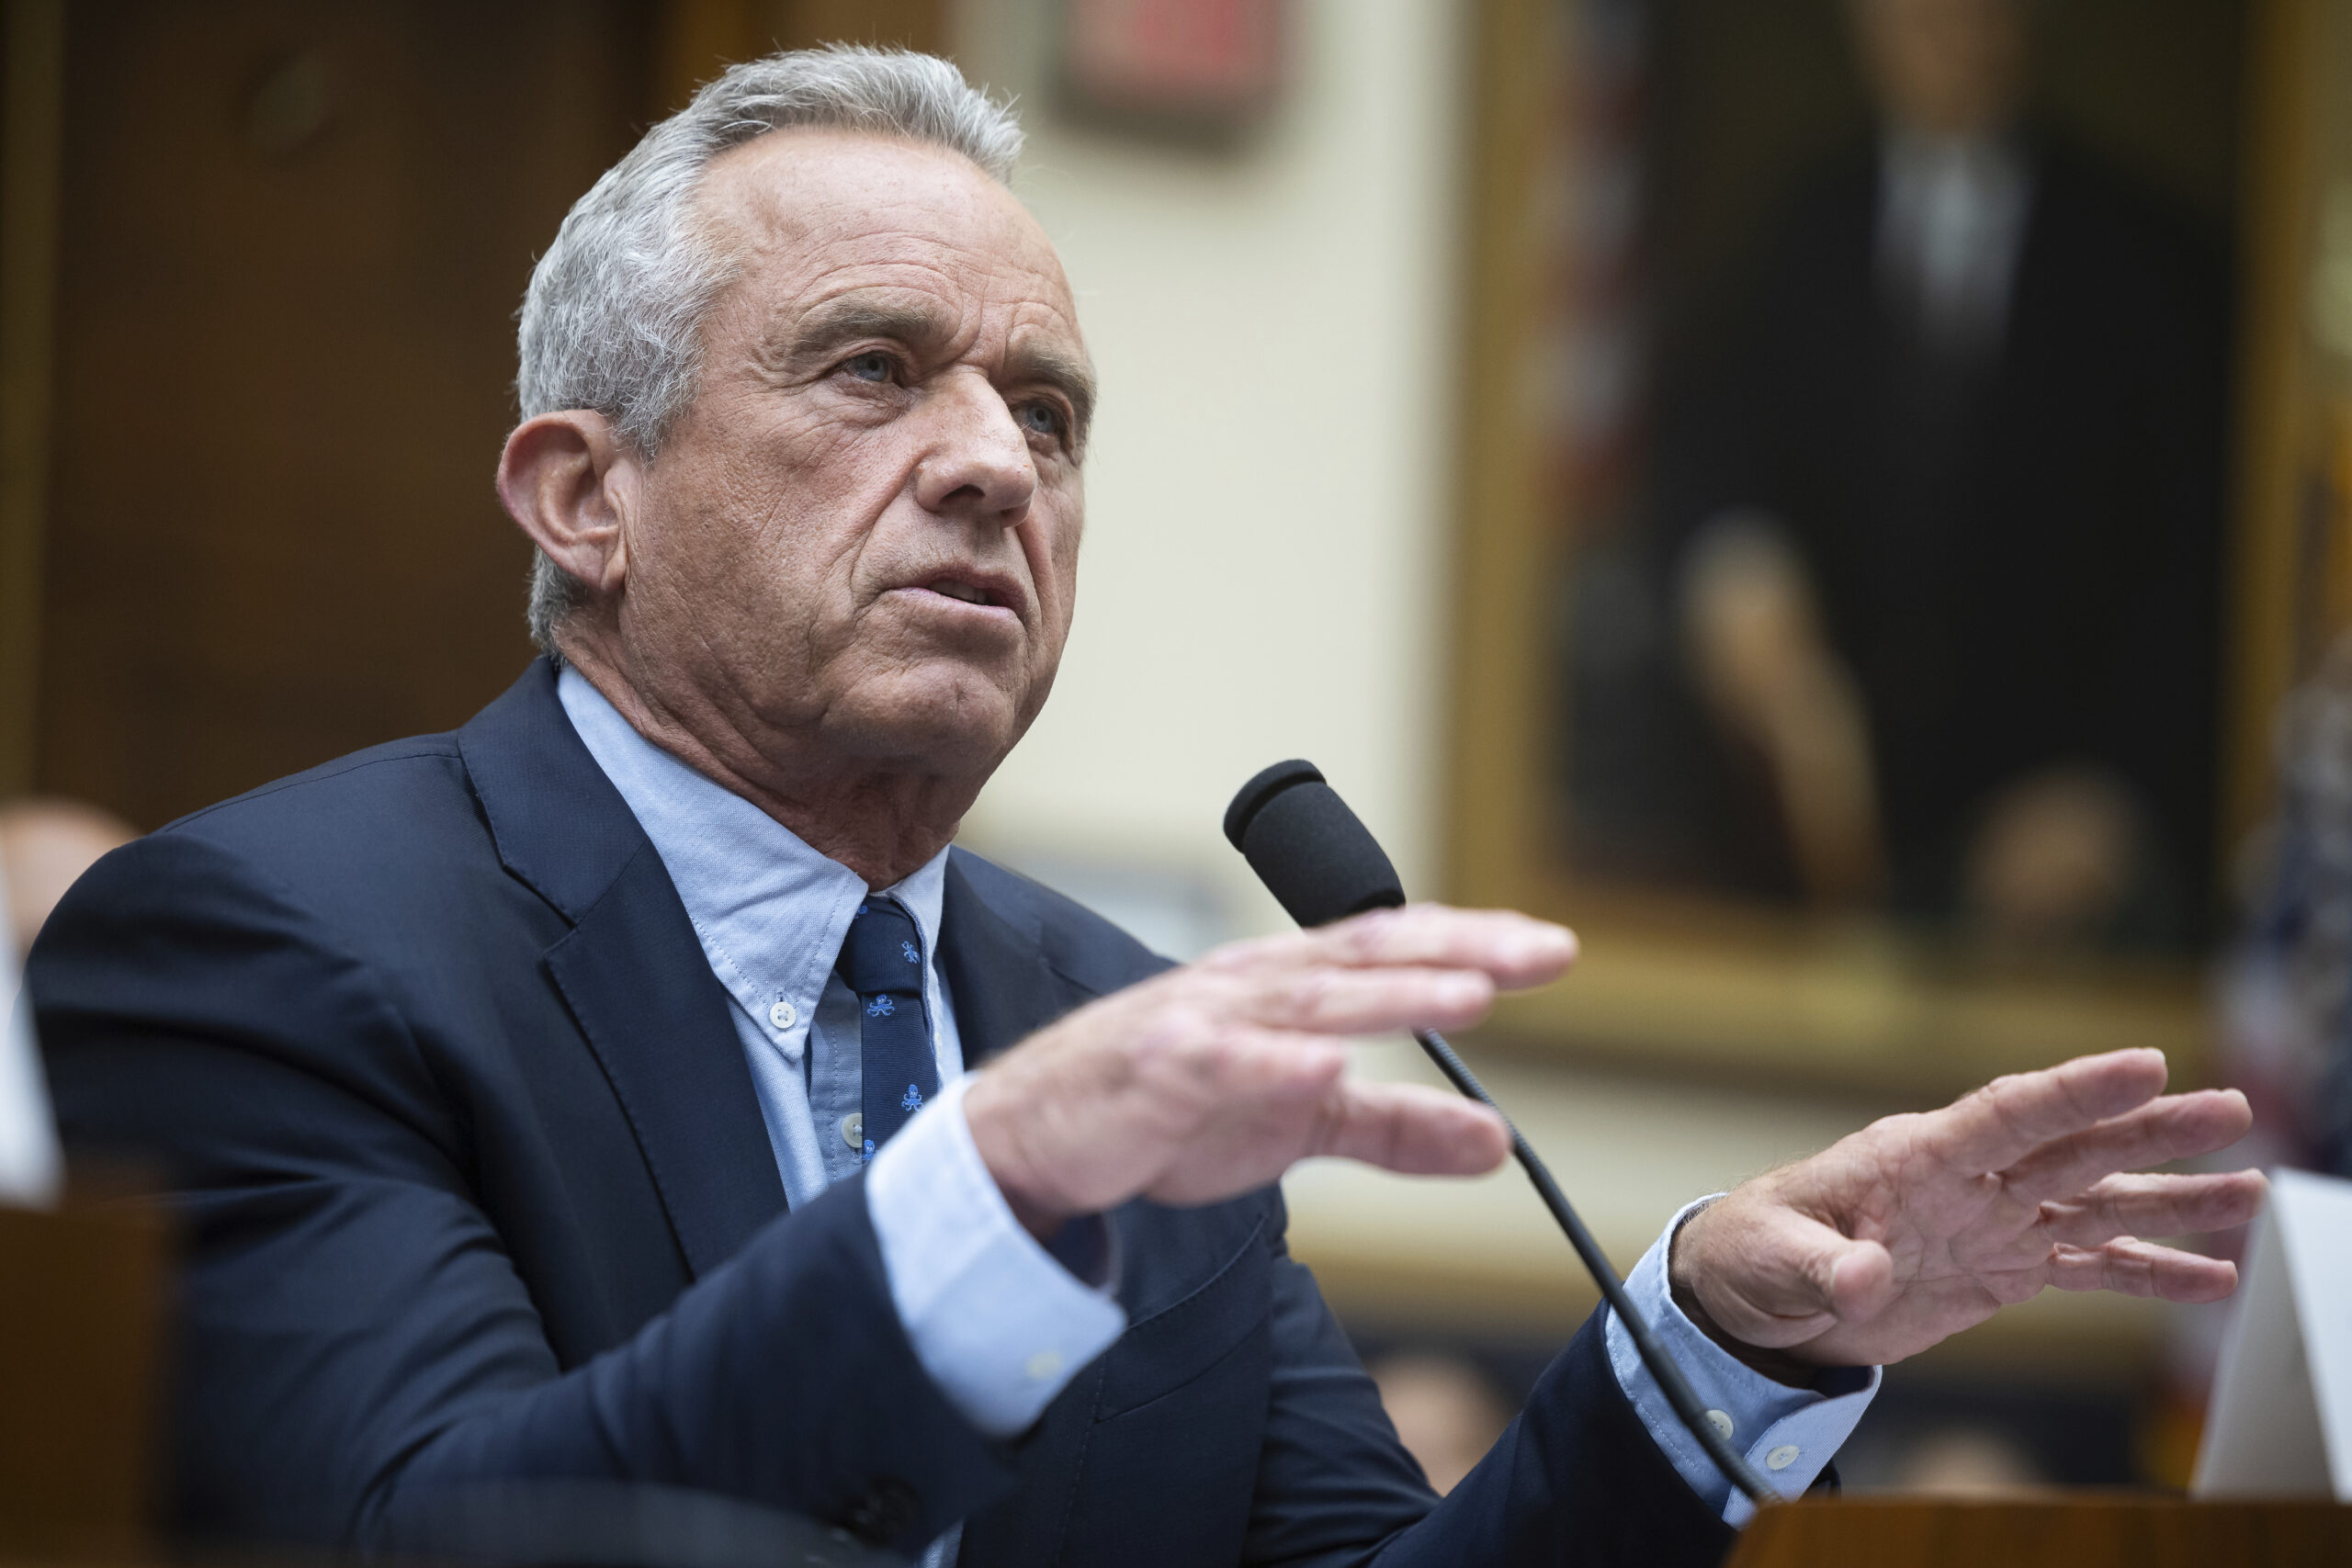 RFK Jr. running for president as an independent is a relief for the Kennedys